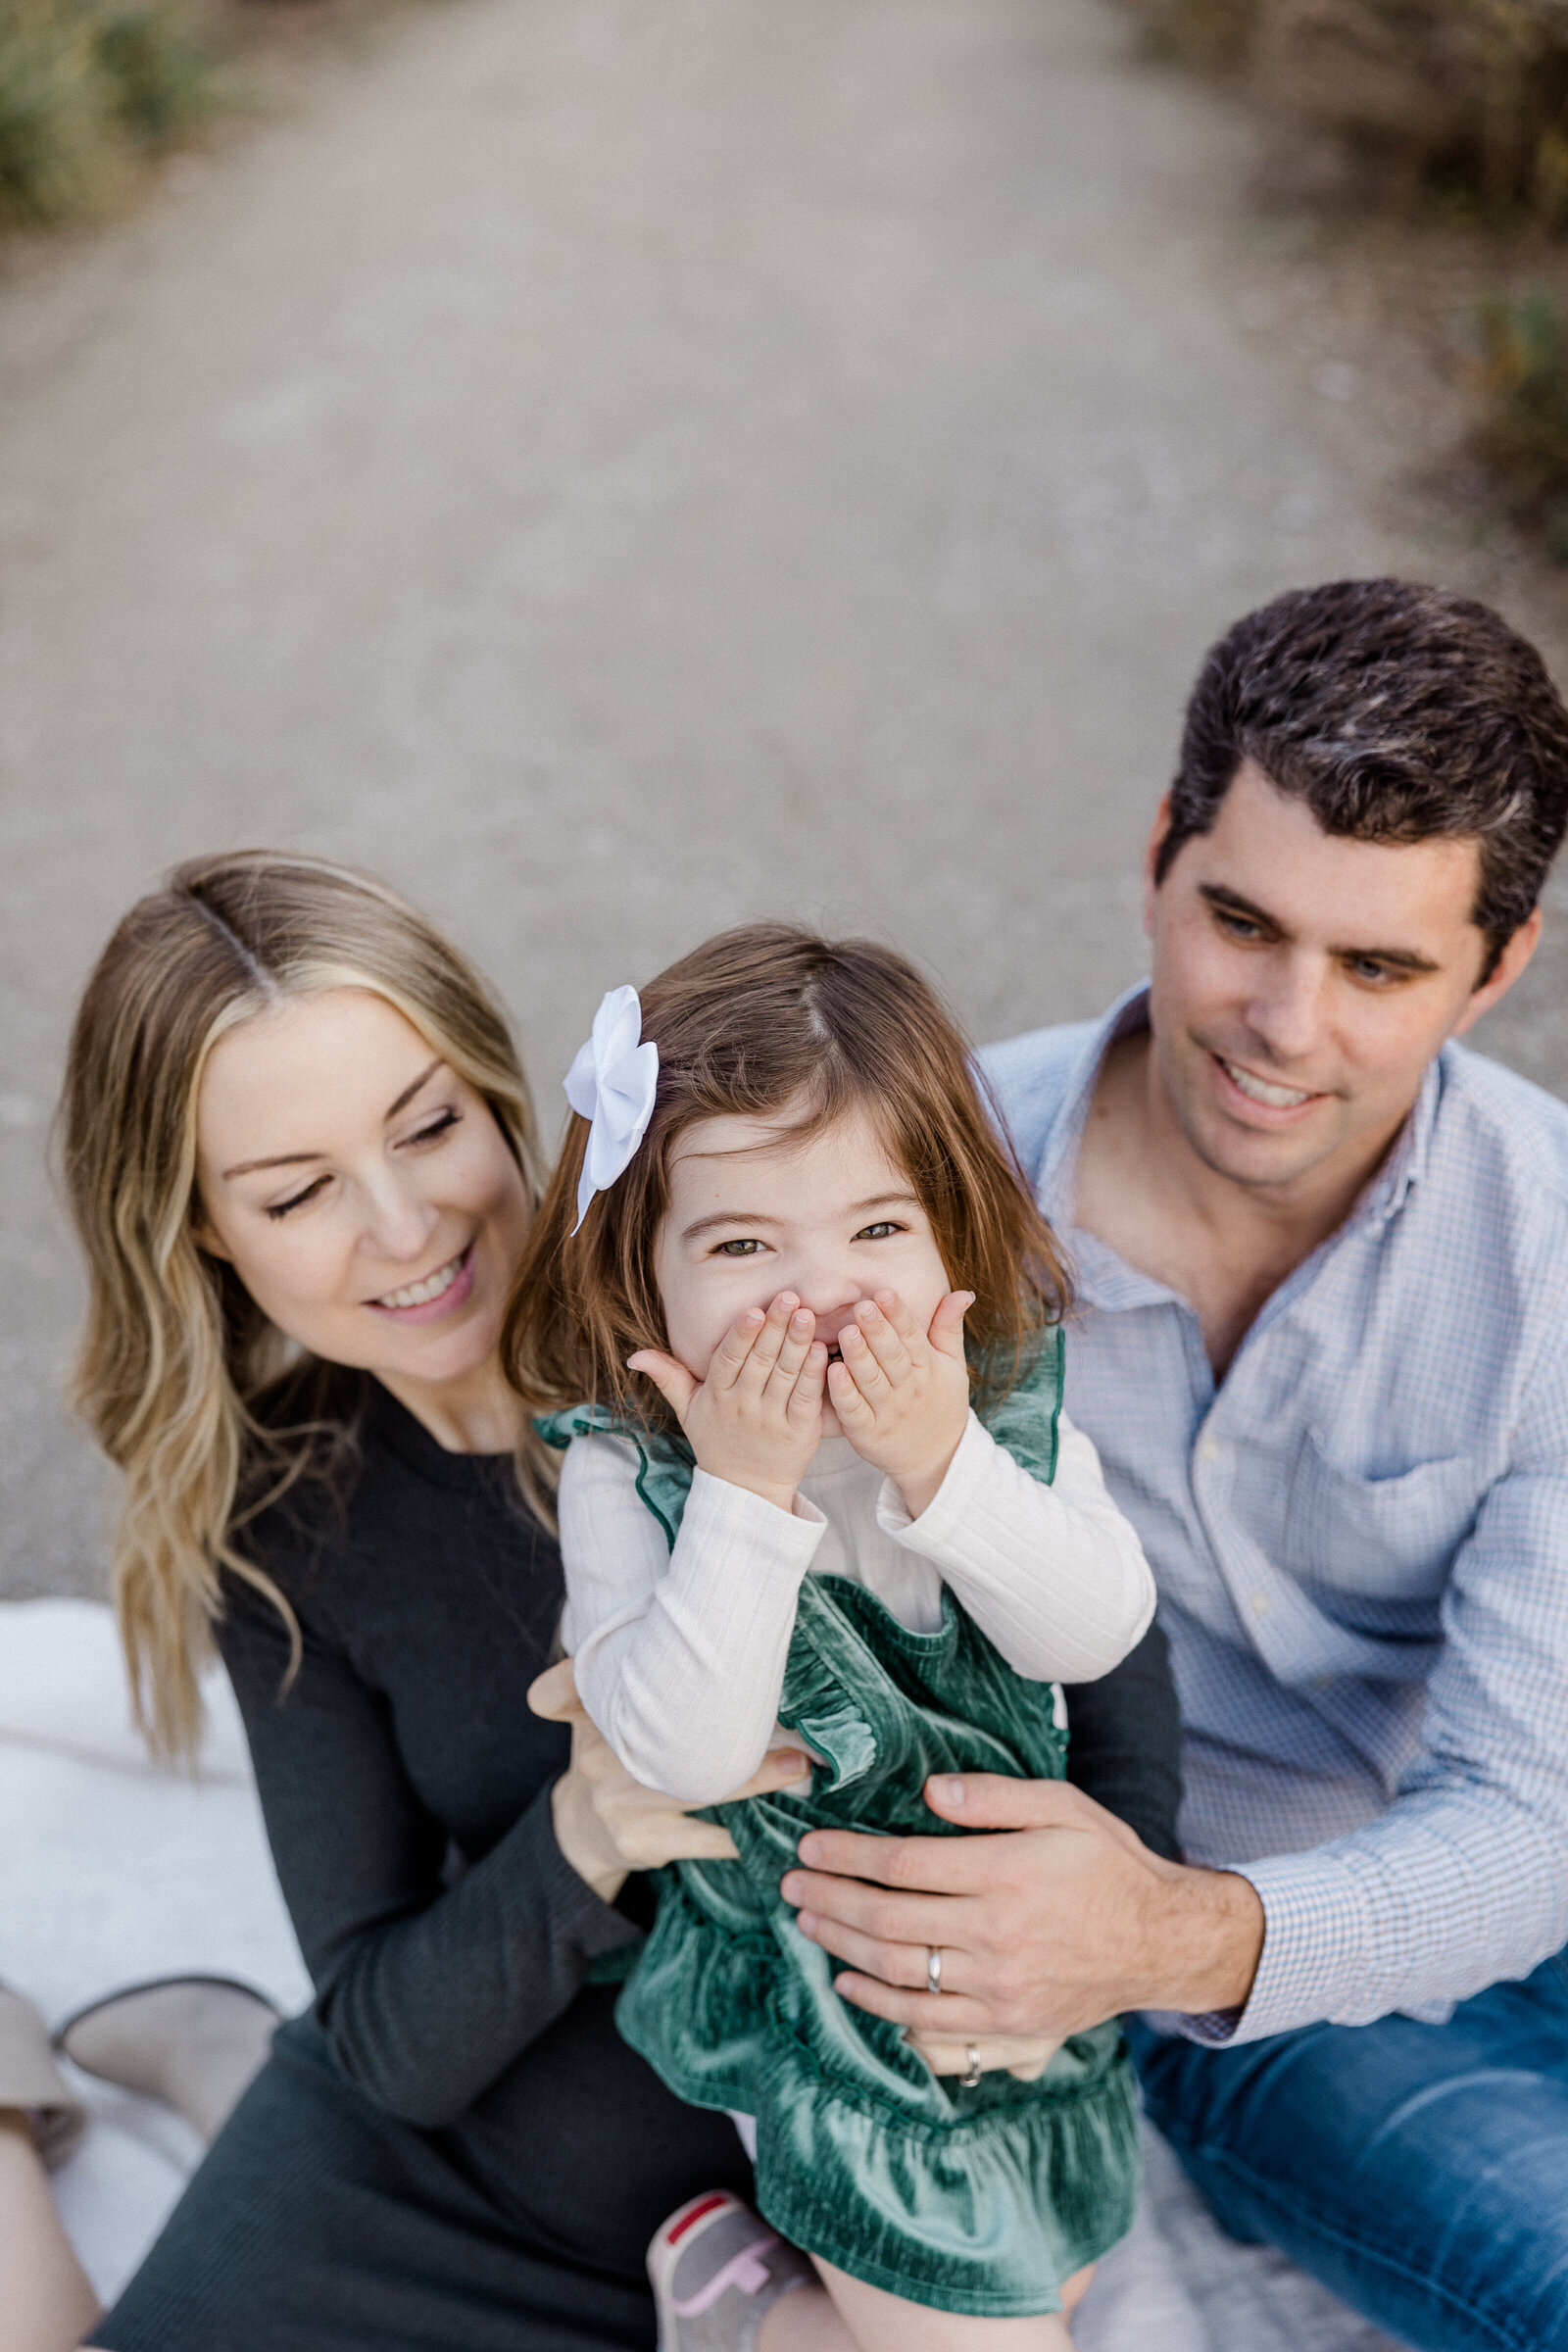 little girl giggling with her mom and dad smiling at her